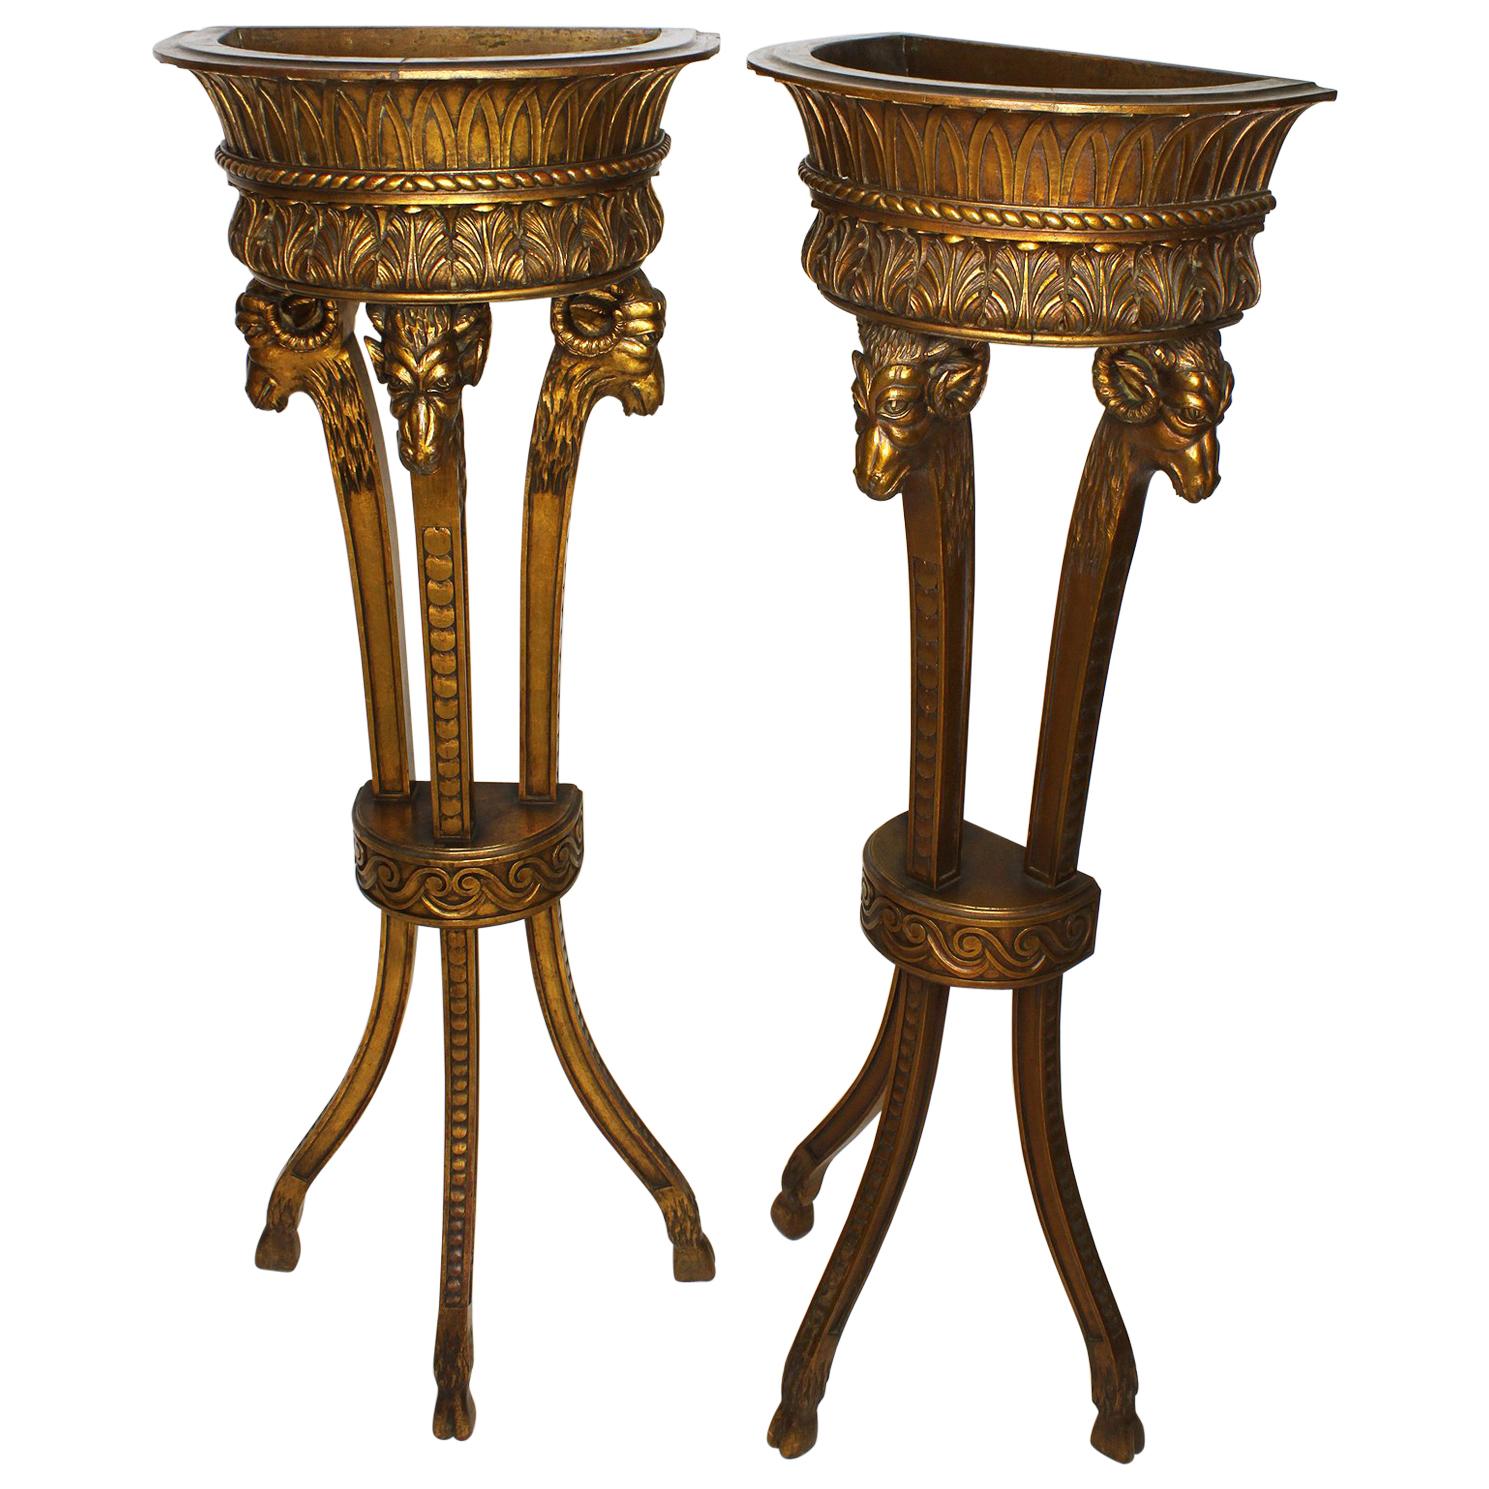 Pair of French 19th-20th Century Giltwood Carved Standing Pedestal Planters